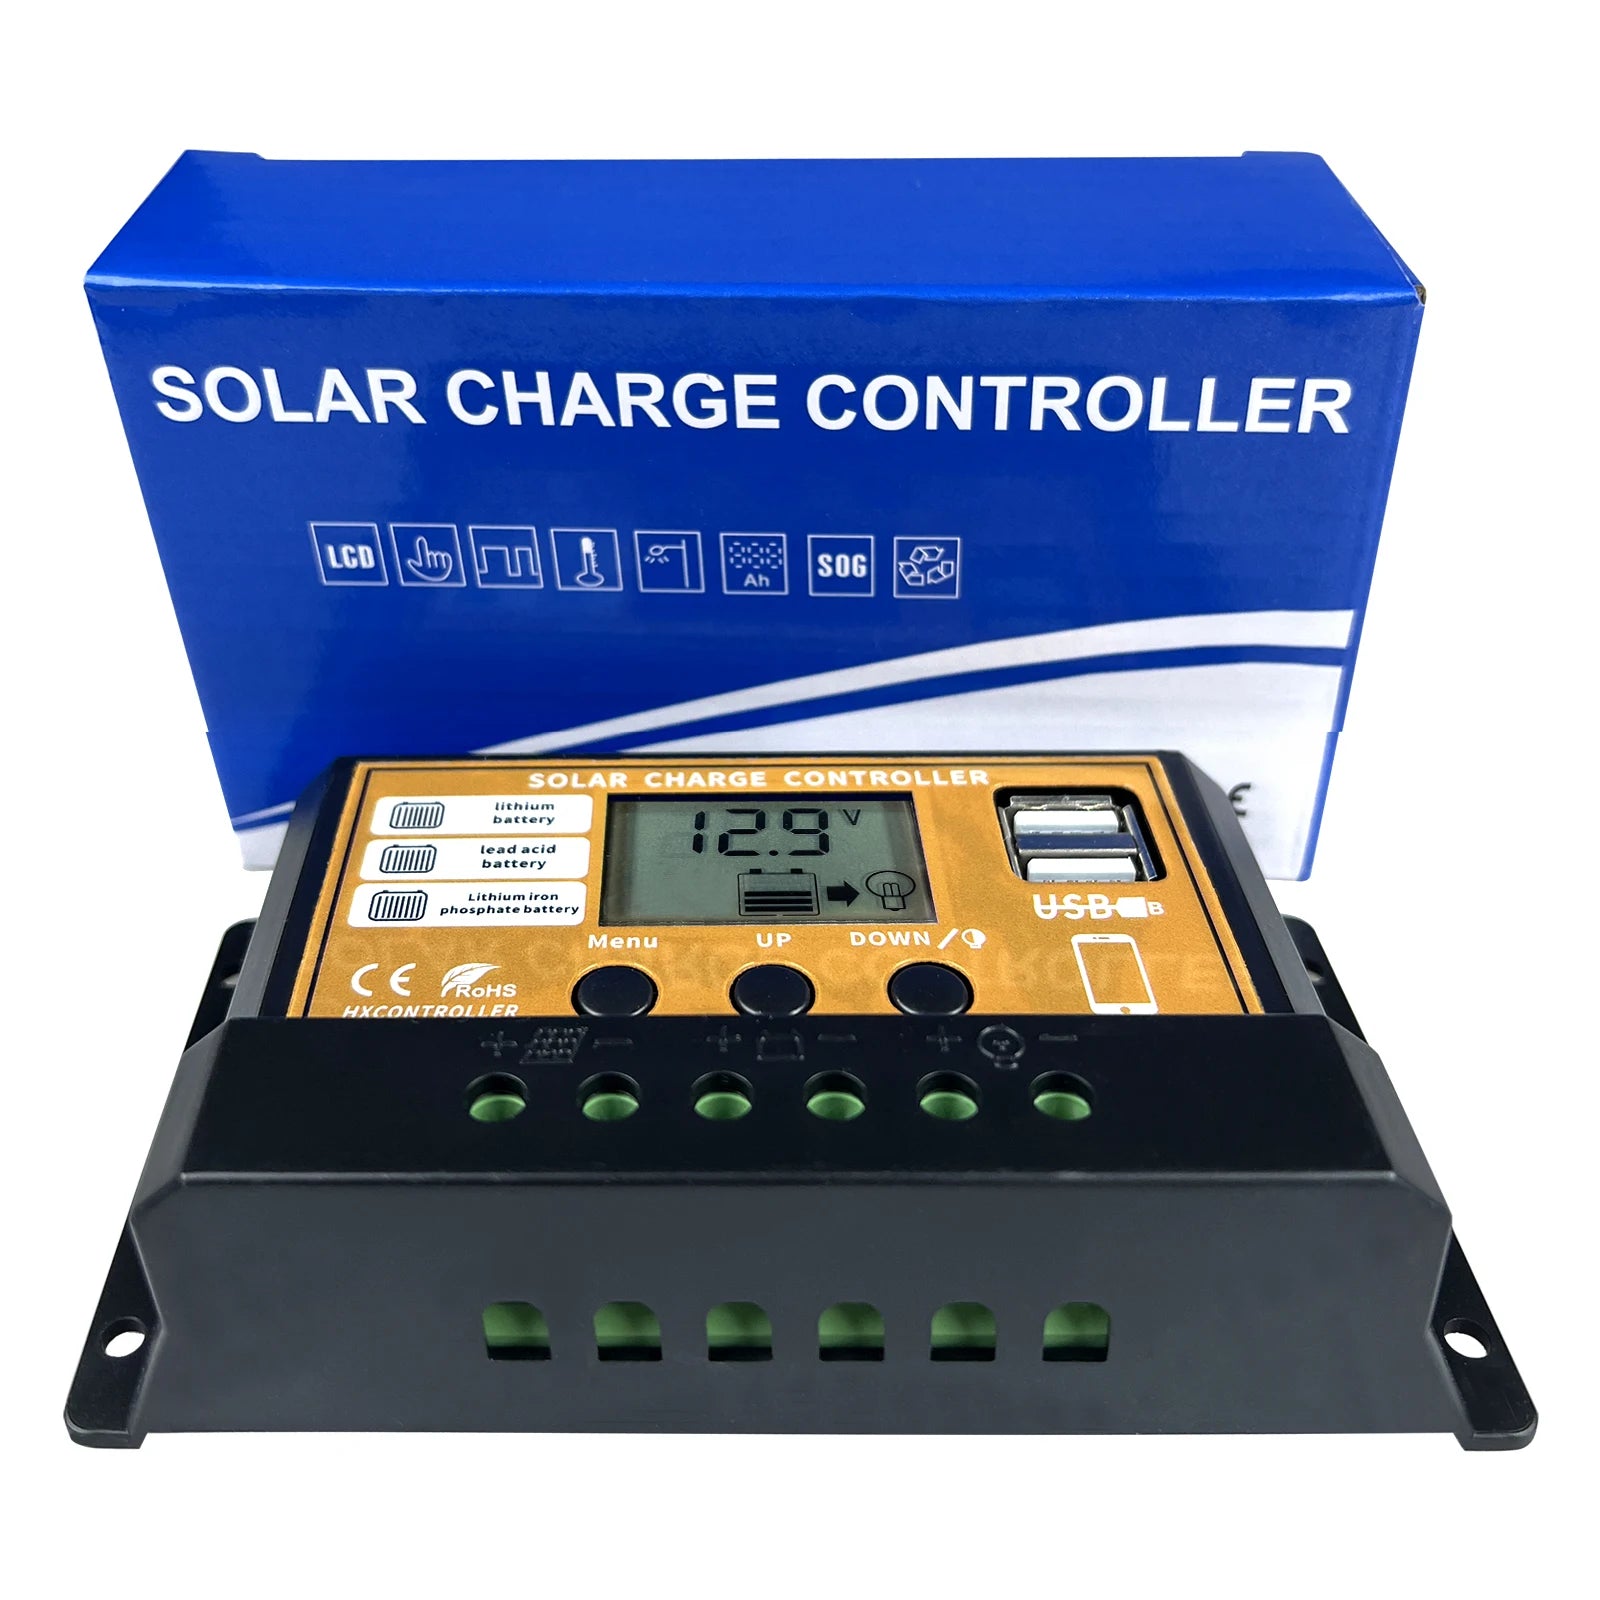 MPPT 720W 480W 360W 240W Solar Charge Controller, Smart solar charge controller with LCD display, compatible with various battery types and featuring adjustable settings.